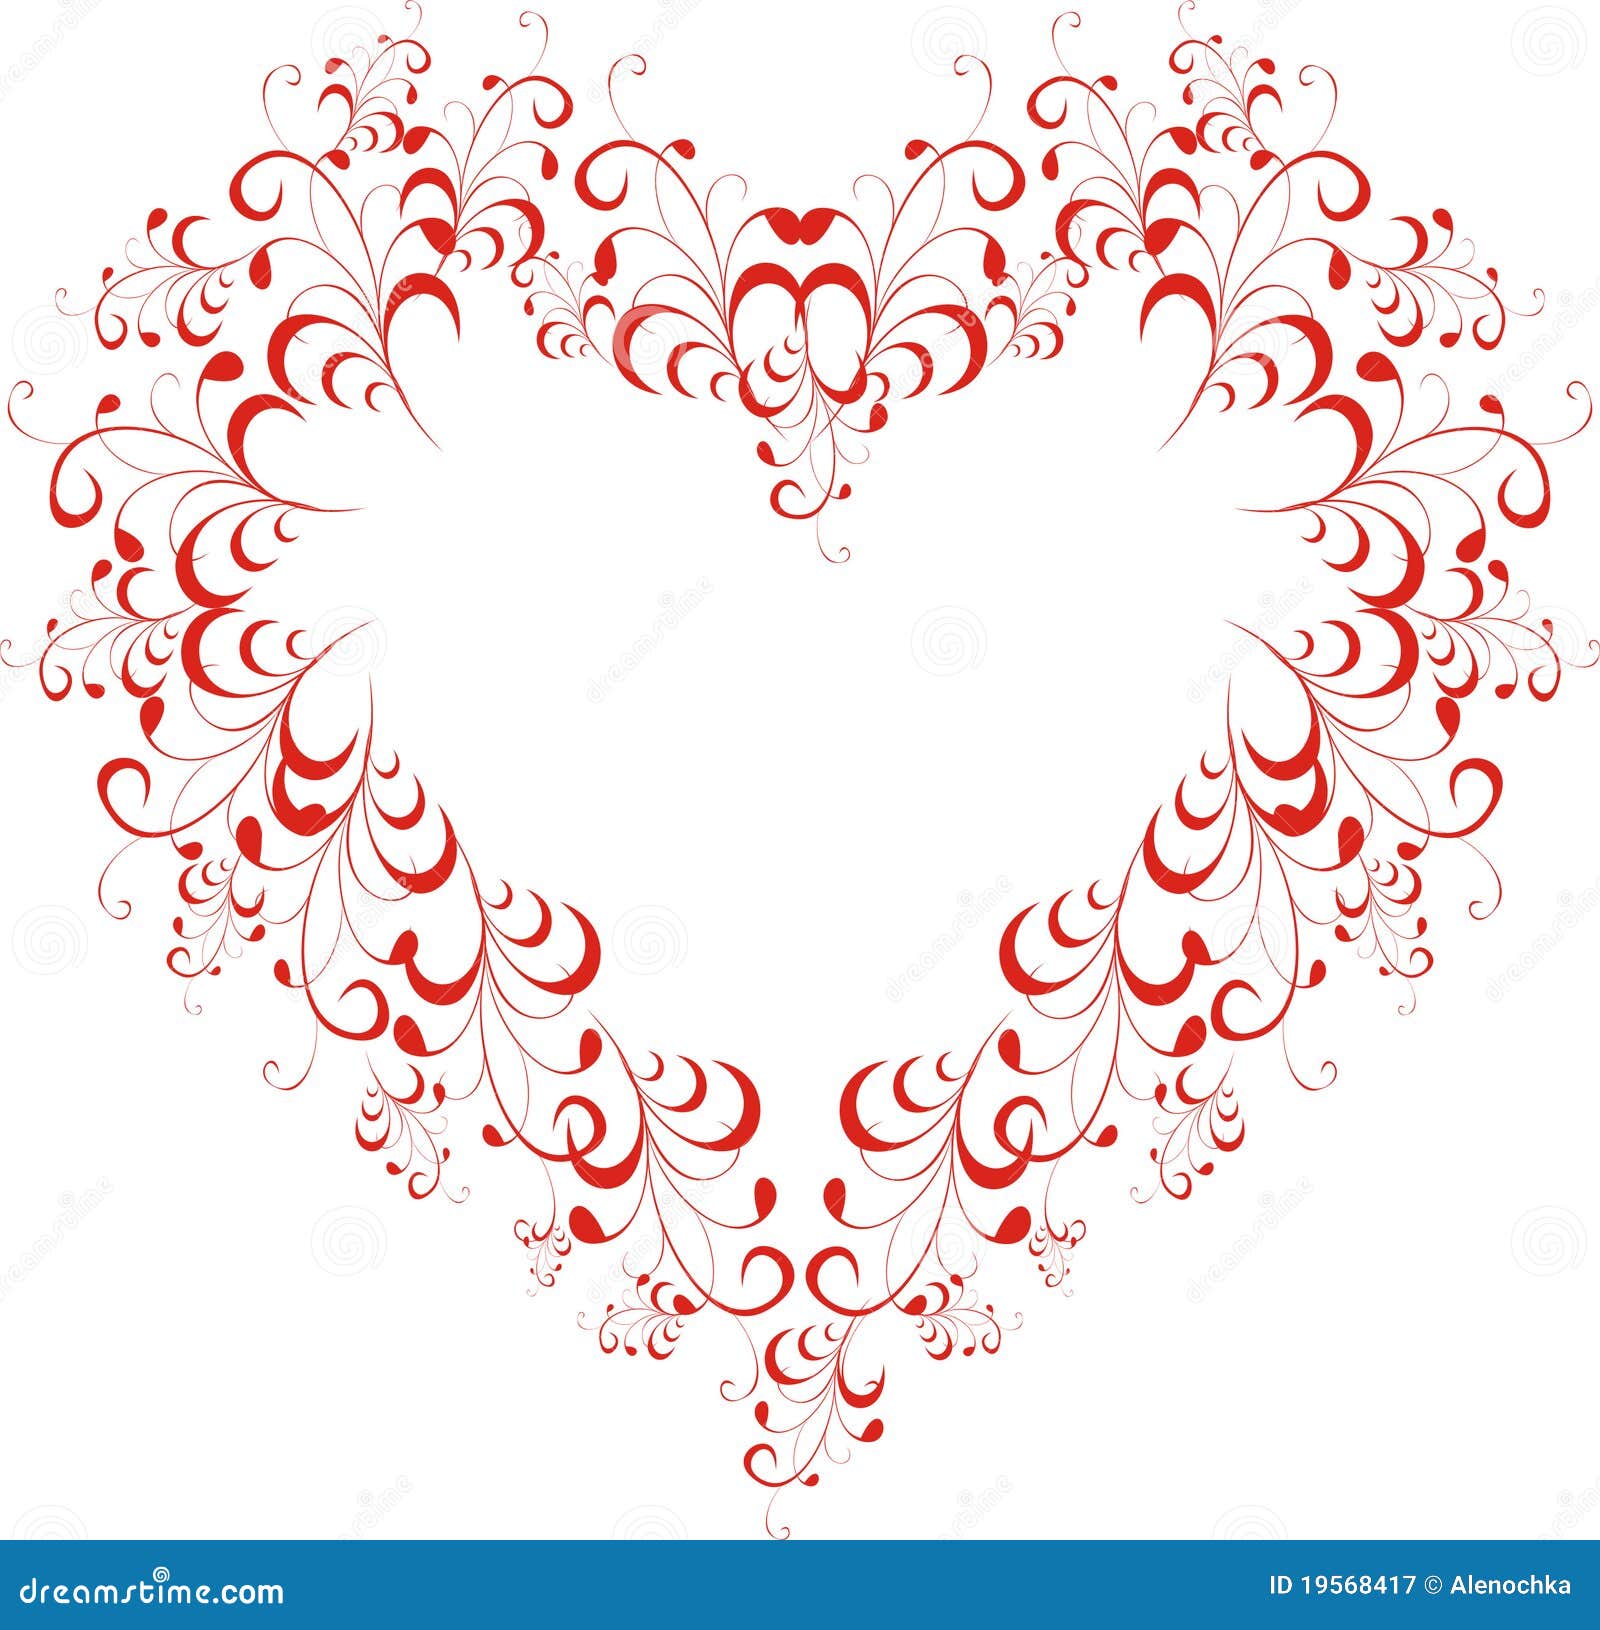 Floral heart stock vector. Illustration of love, passion - 19568417